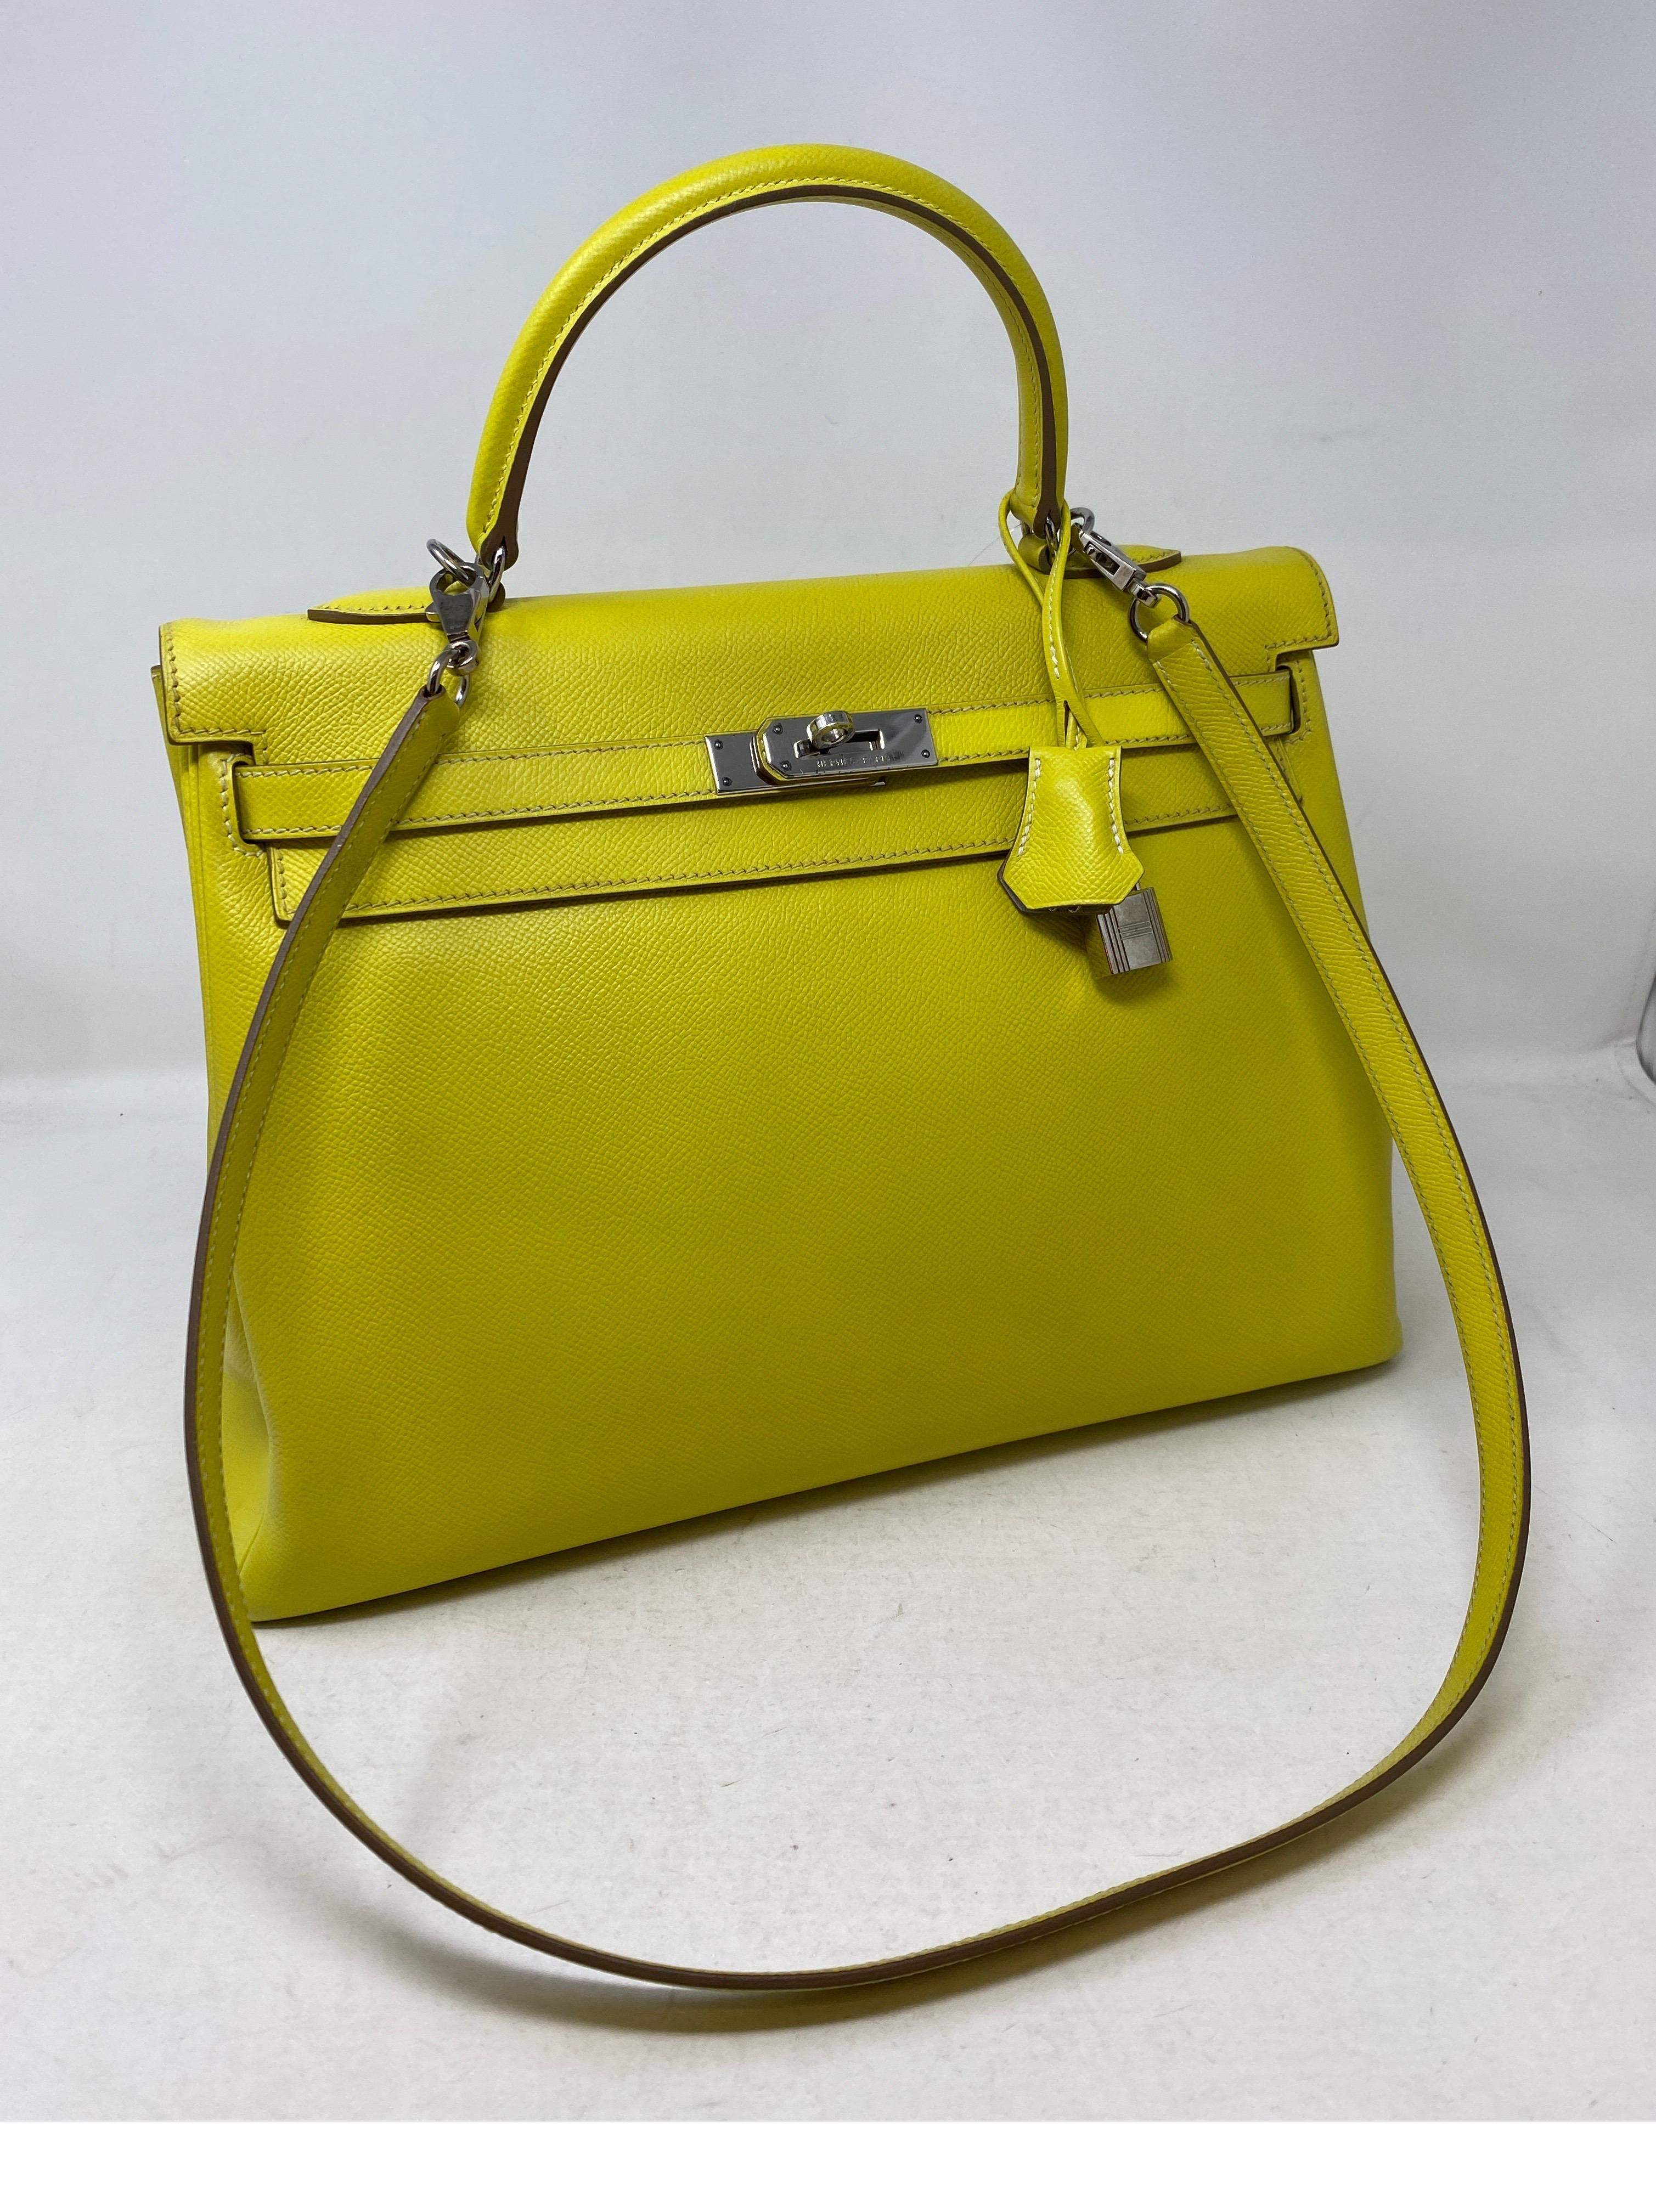 Hermes Yellow Kelly 35 Bag. Good condition. Candy limited edition. Interior light grey color. Exterior yellow bag. Includes clochette, lock, keys, and dust cover. Guaranteed authentic. 